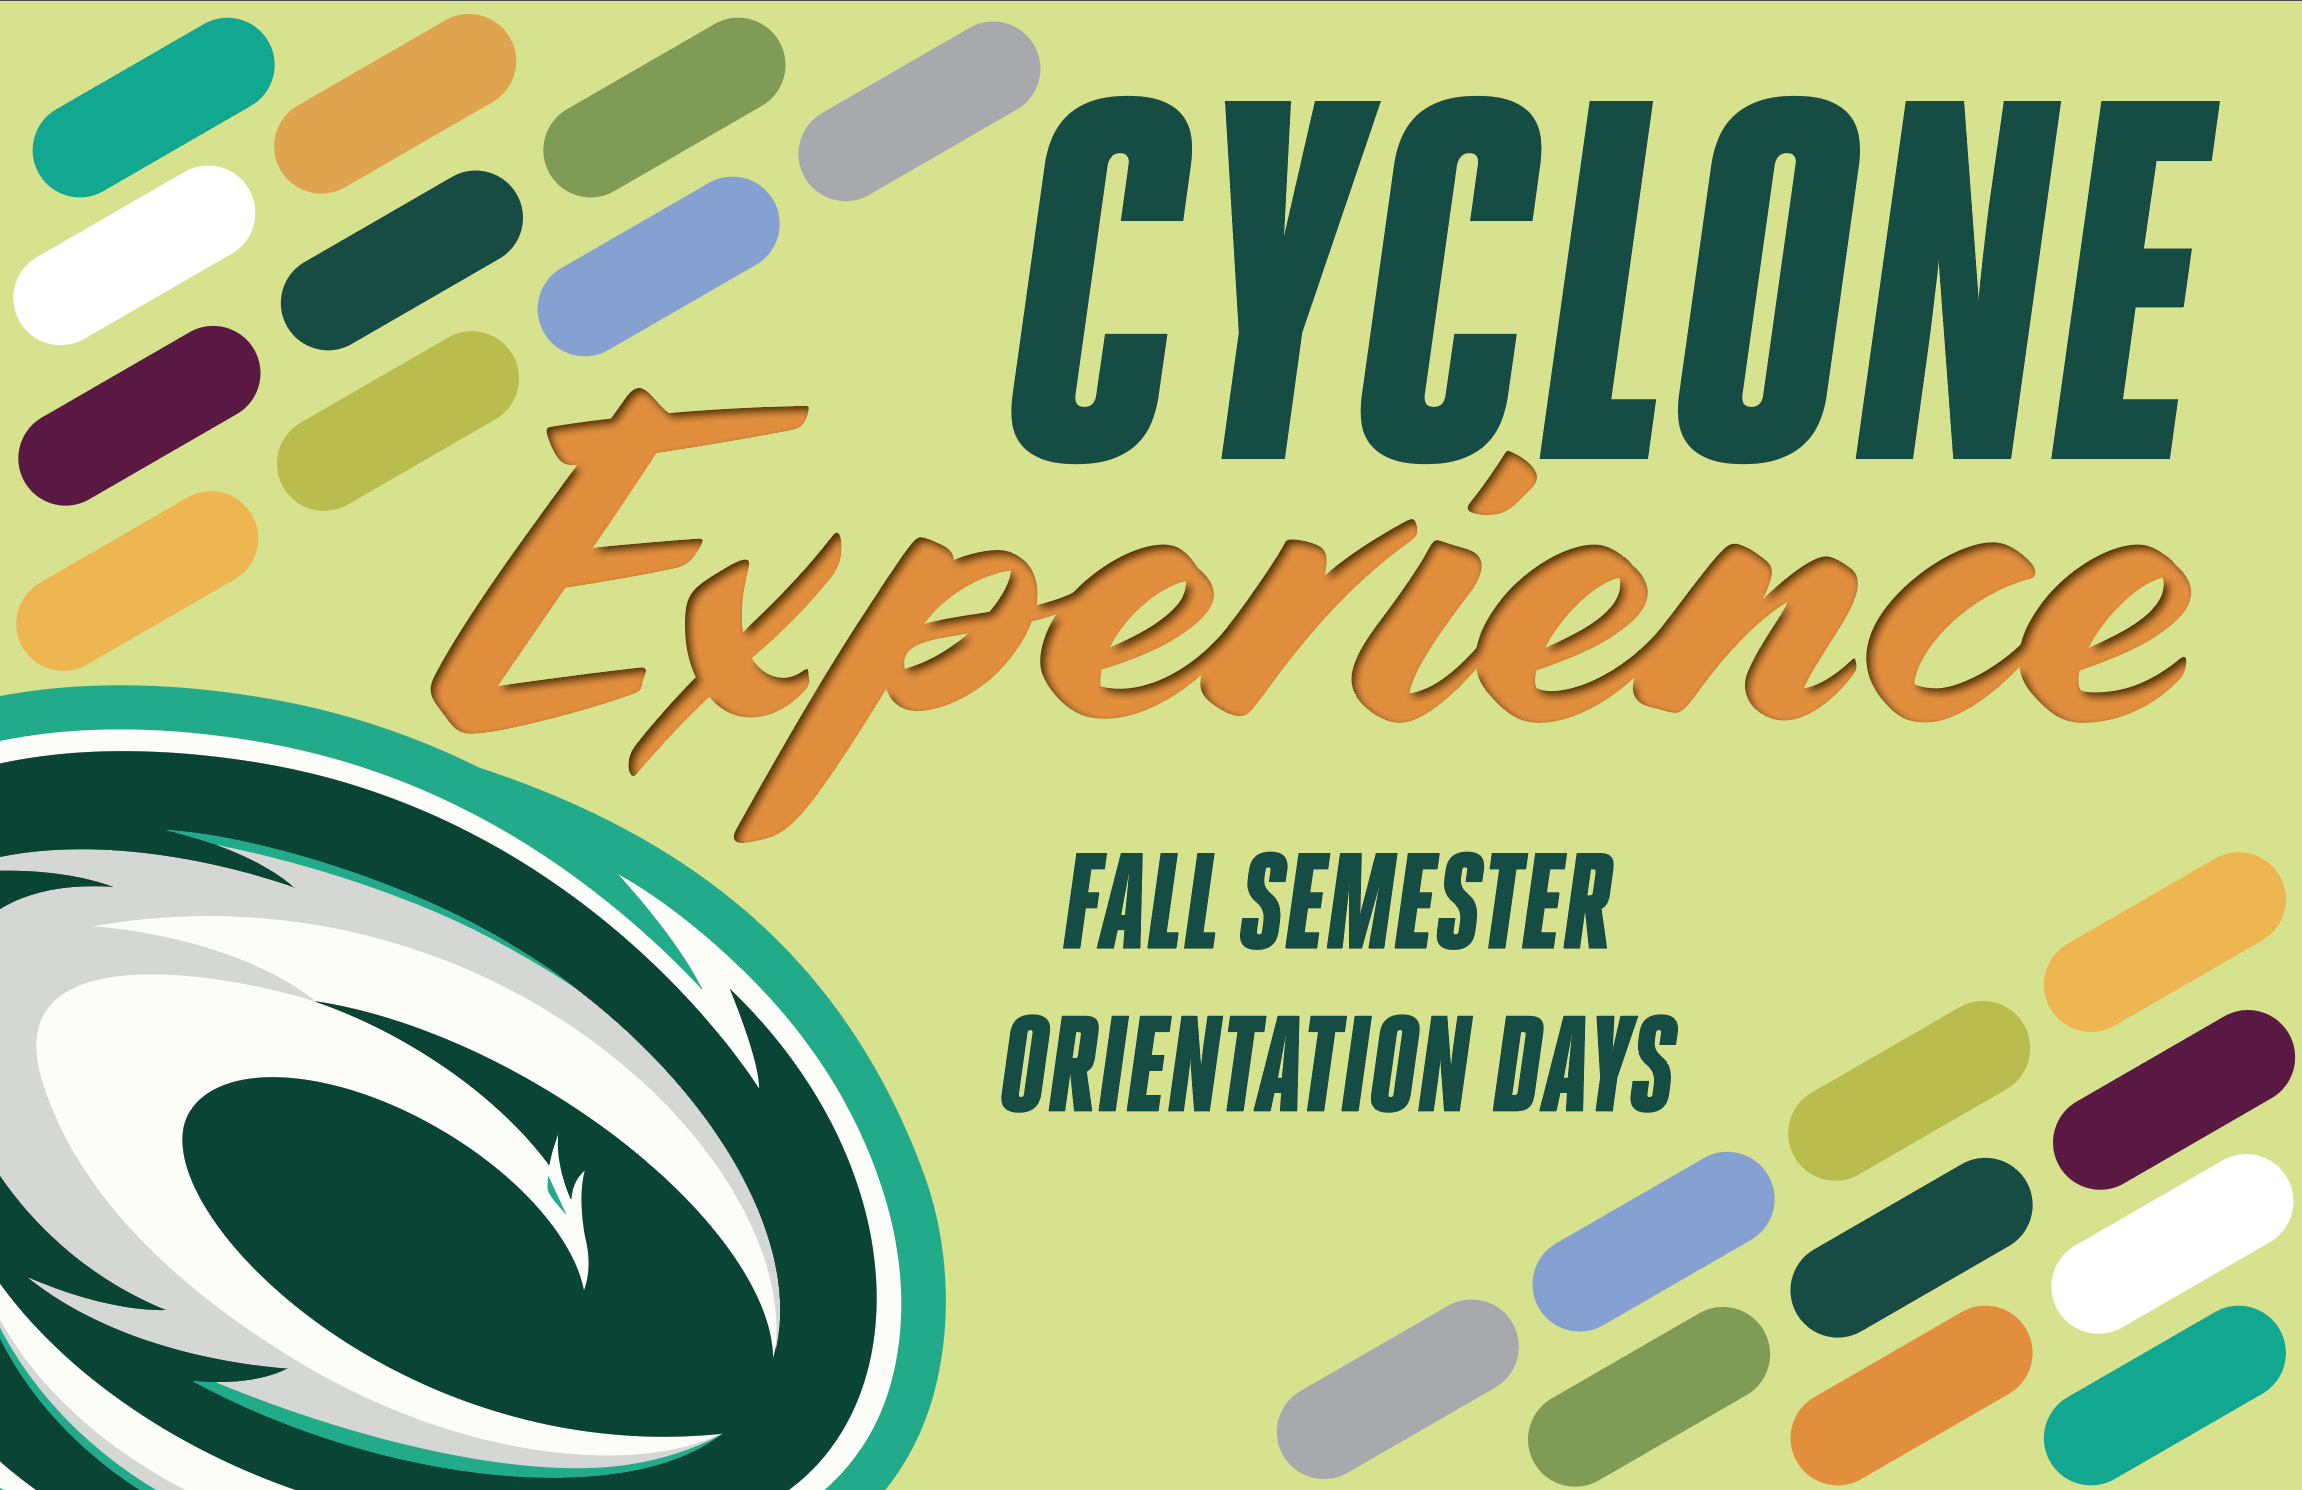 Cyclone Experience text on decorative background with cyclone logo